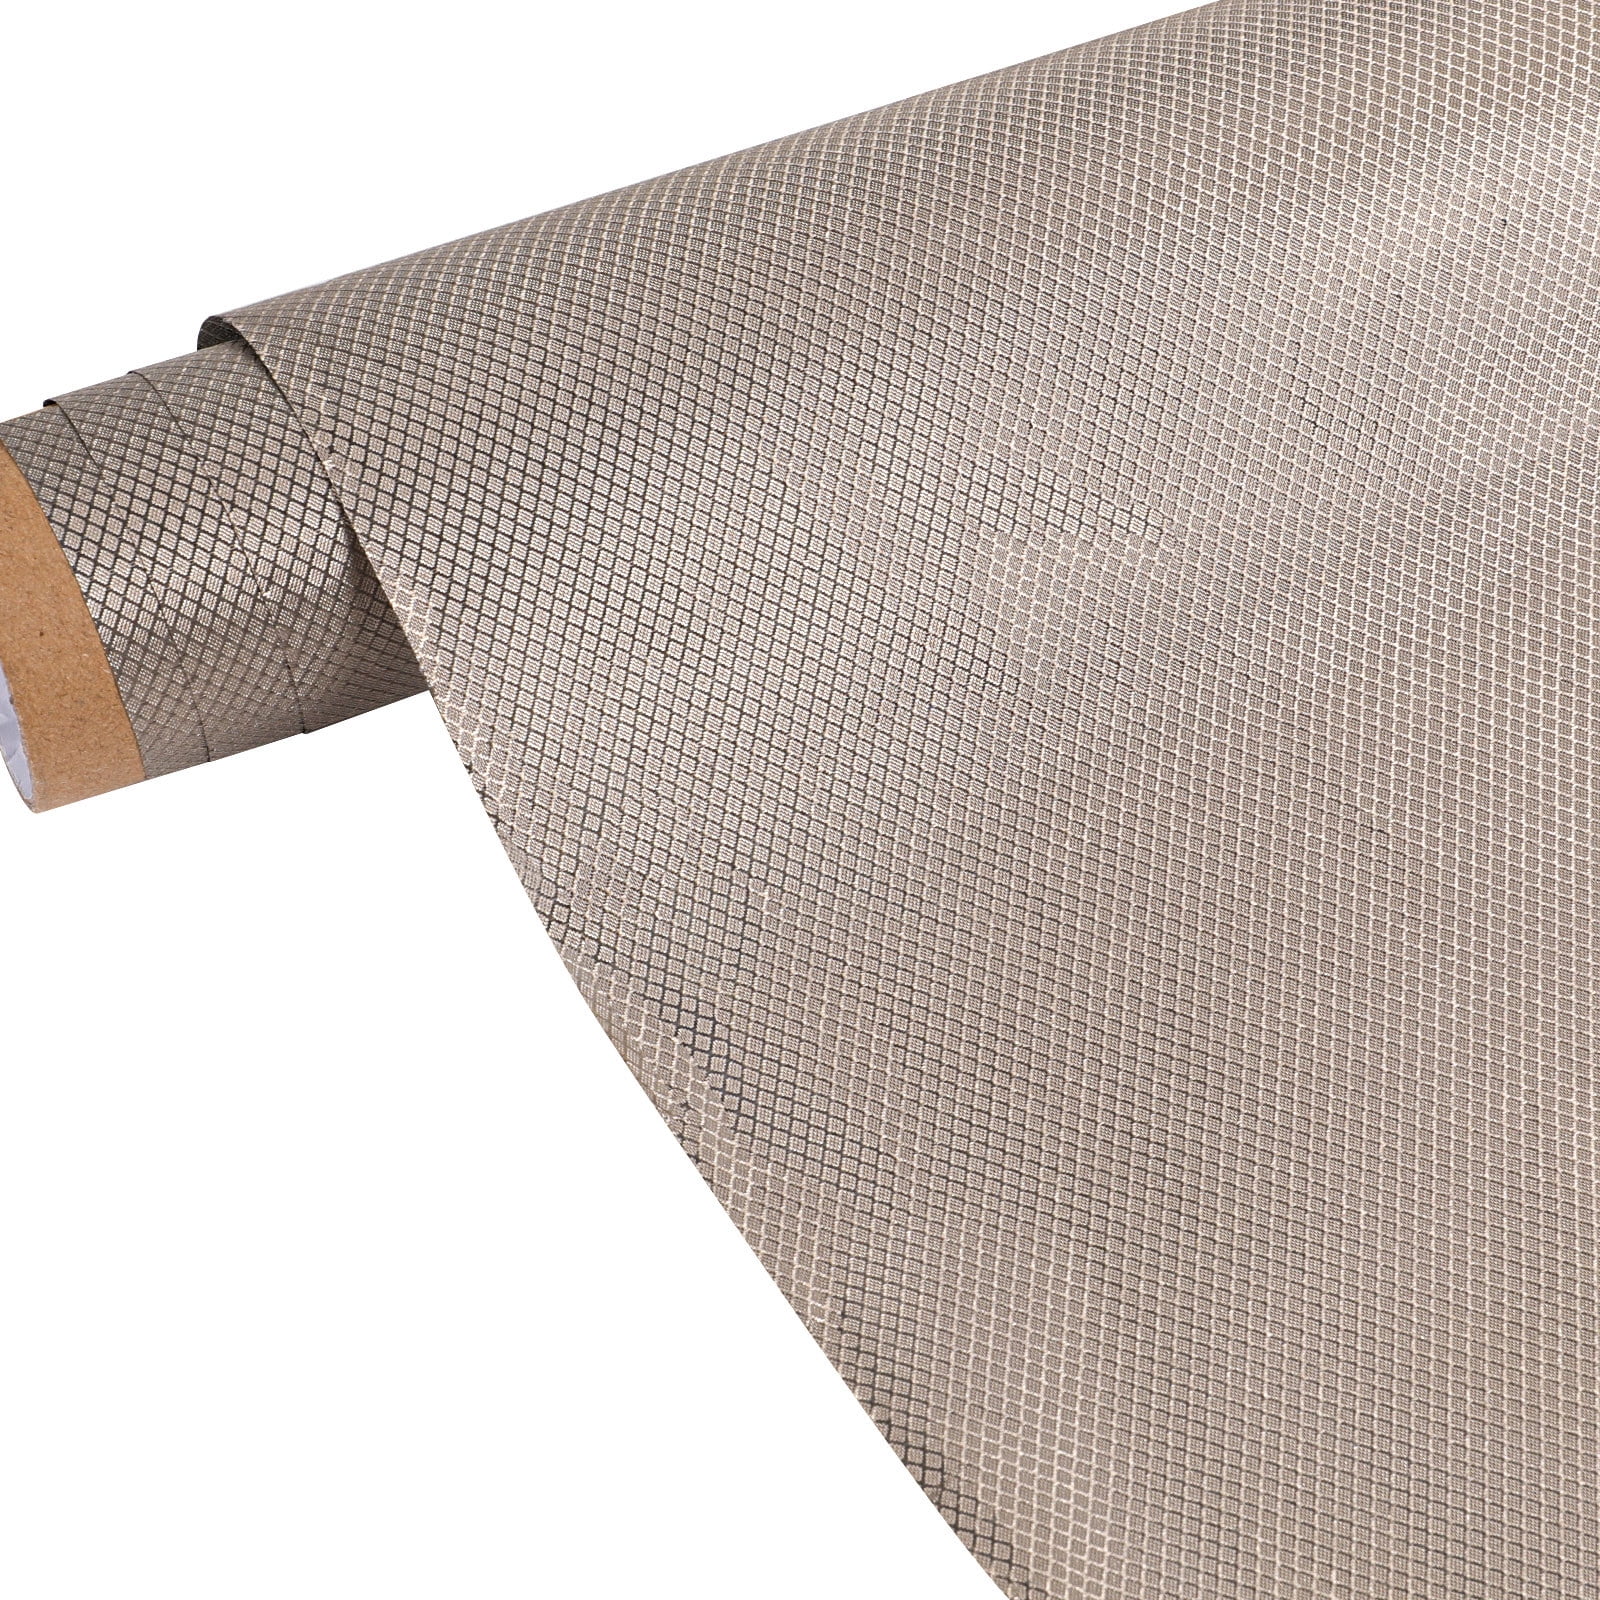 Faraday Fabric, 44'' 108'' Shielding Fabric, Copper/Nickle Faraday Cage(3  Yards,44in 108 in)